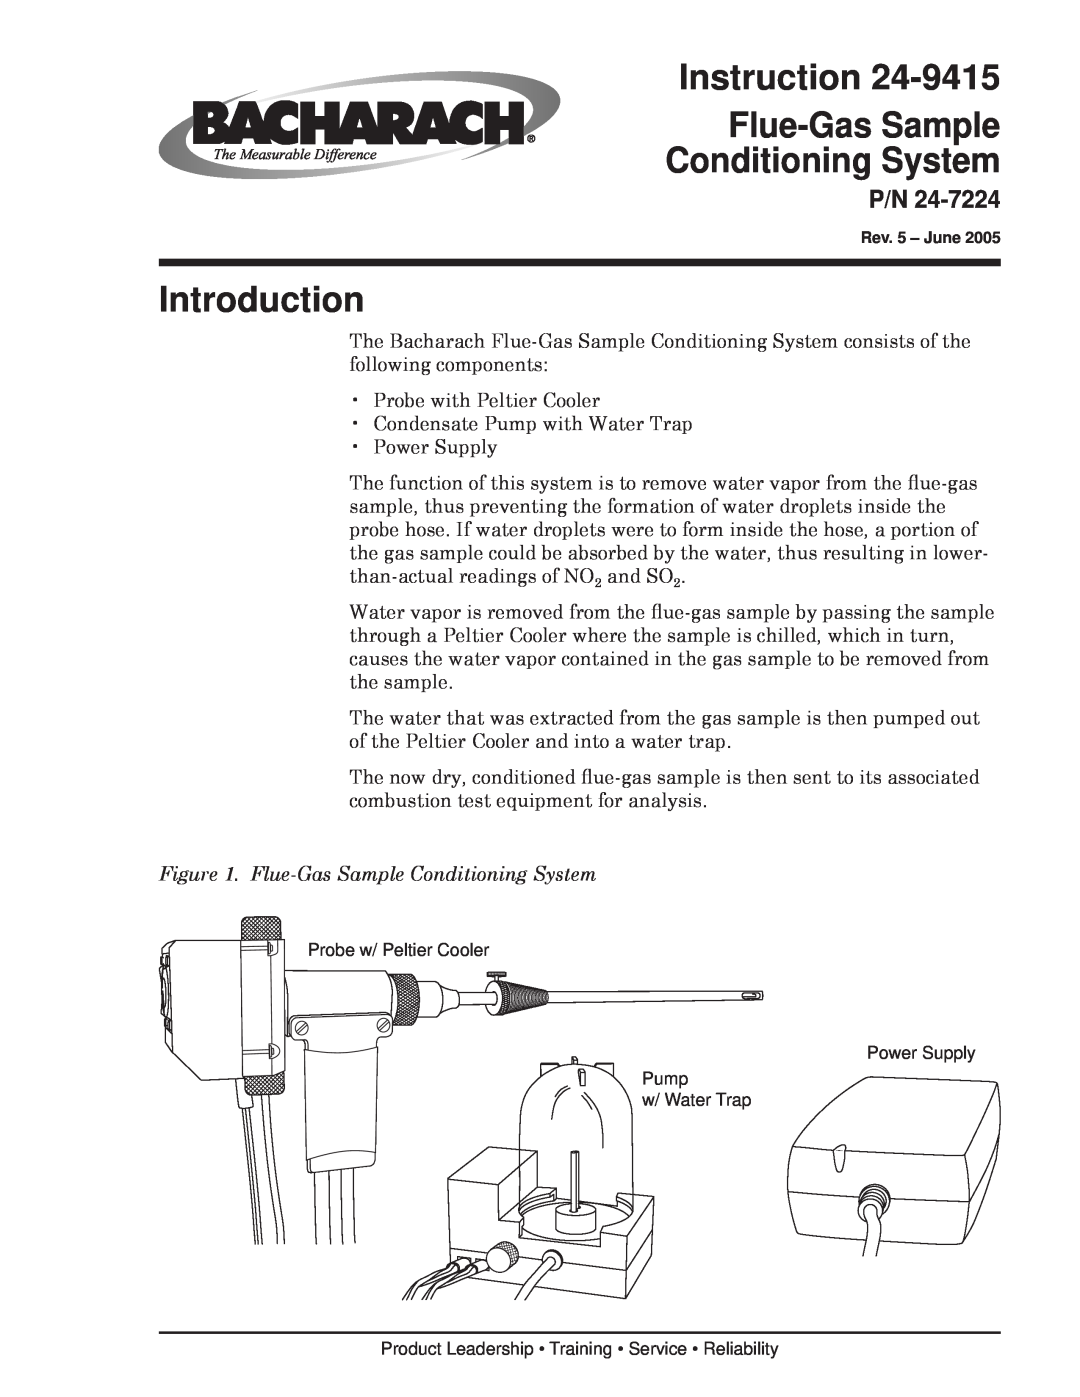 Bacharach 24-7224, 24-9415 manual Instruction Flue-GasSample Conditioning System, Introduction 